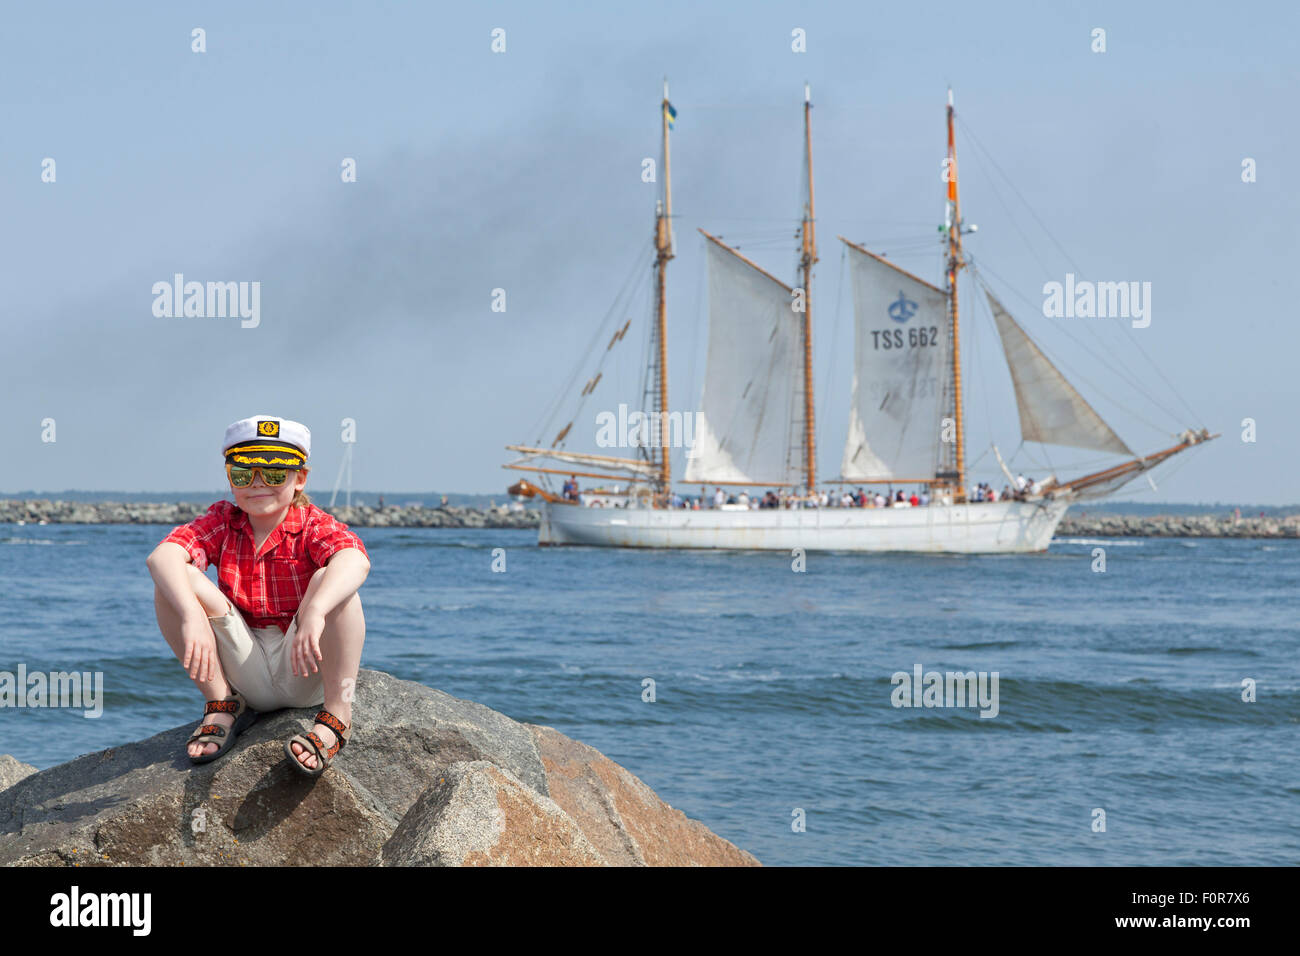 young captain in front of sailing ship, Warnemuende, Rostock, Mecklenburg-West Pomerania, Germany Stock Photo